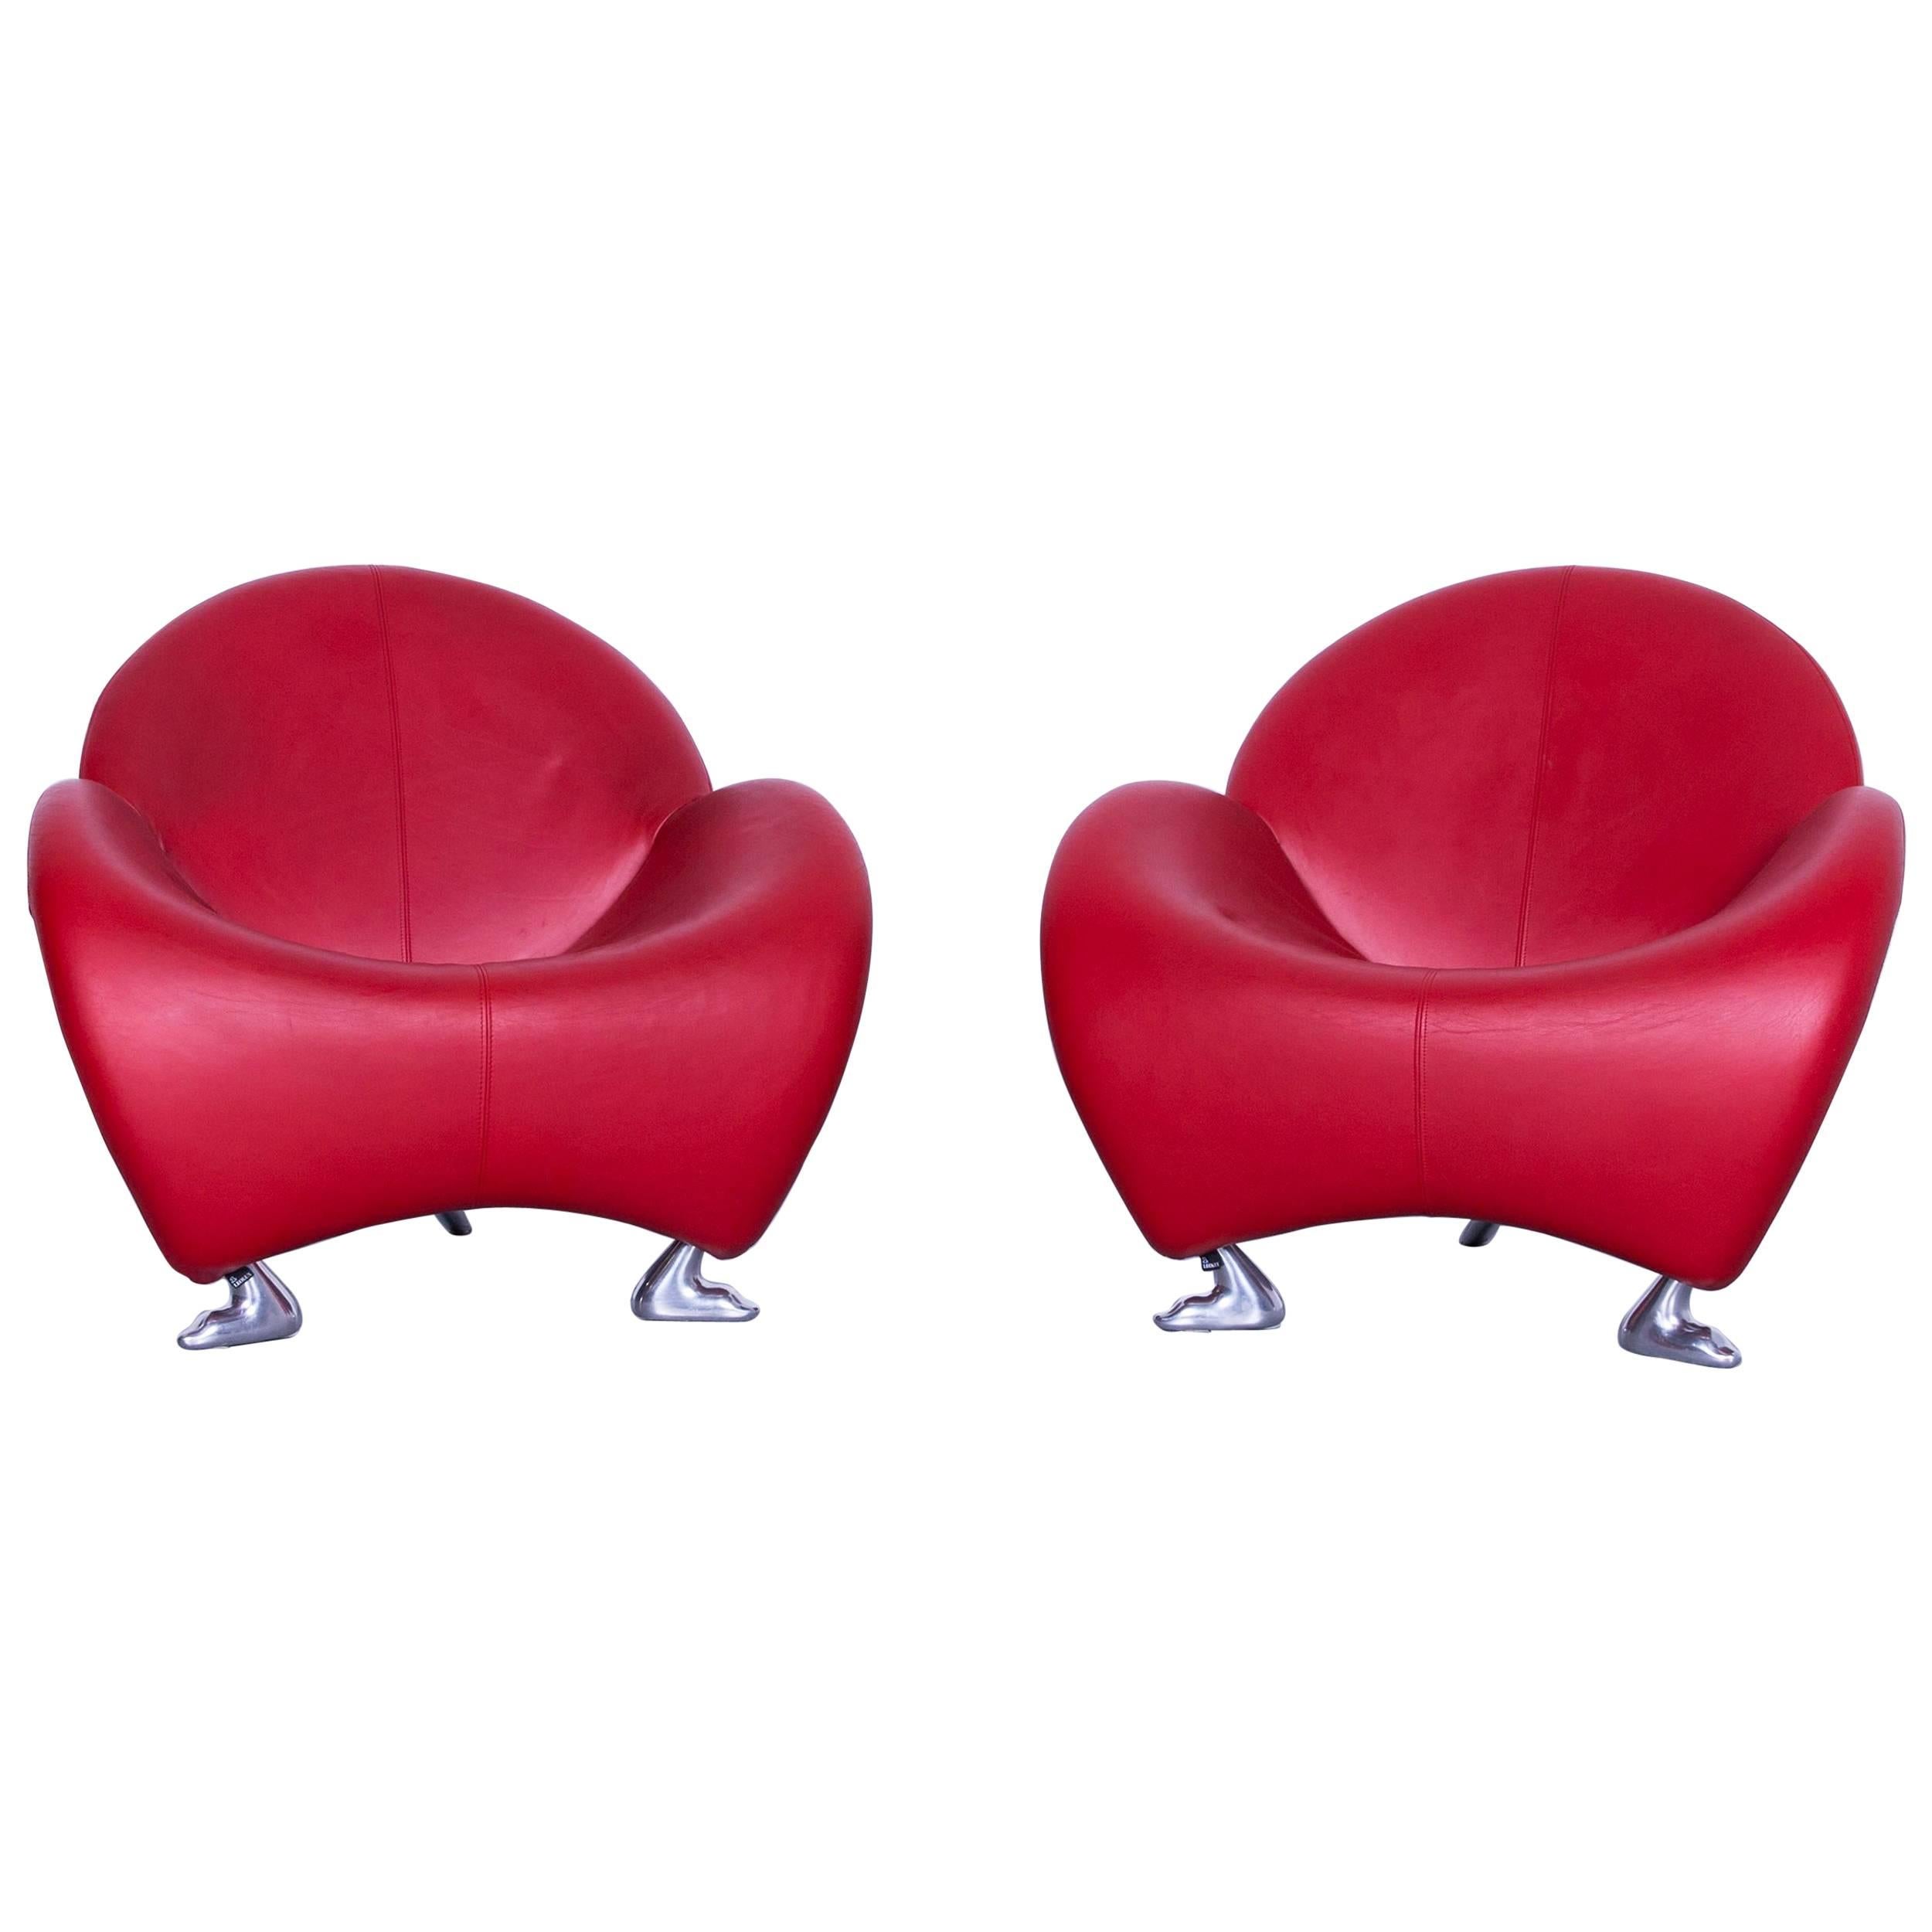 Leolux Papageno Designer Leather Chair Set Red One-Seat Lounge Modern